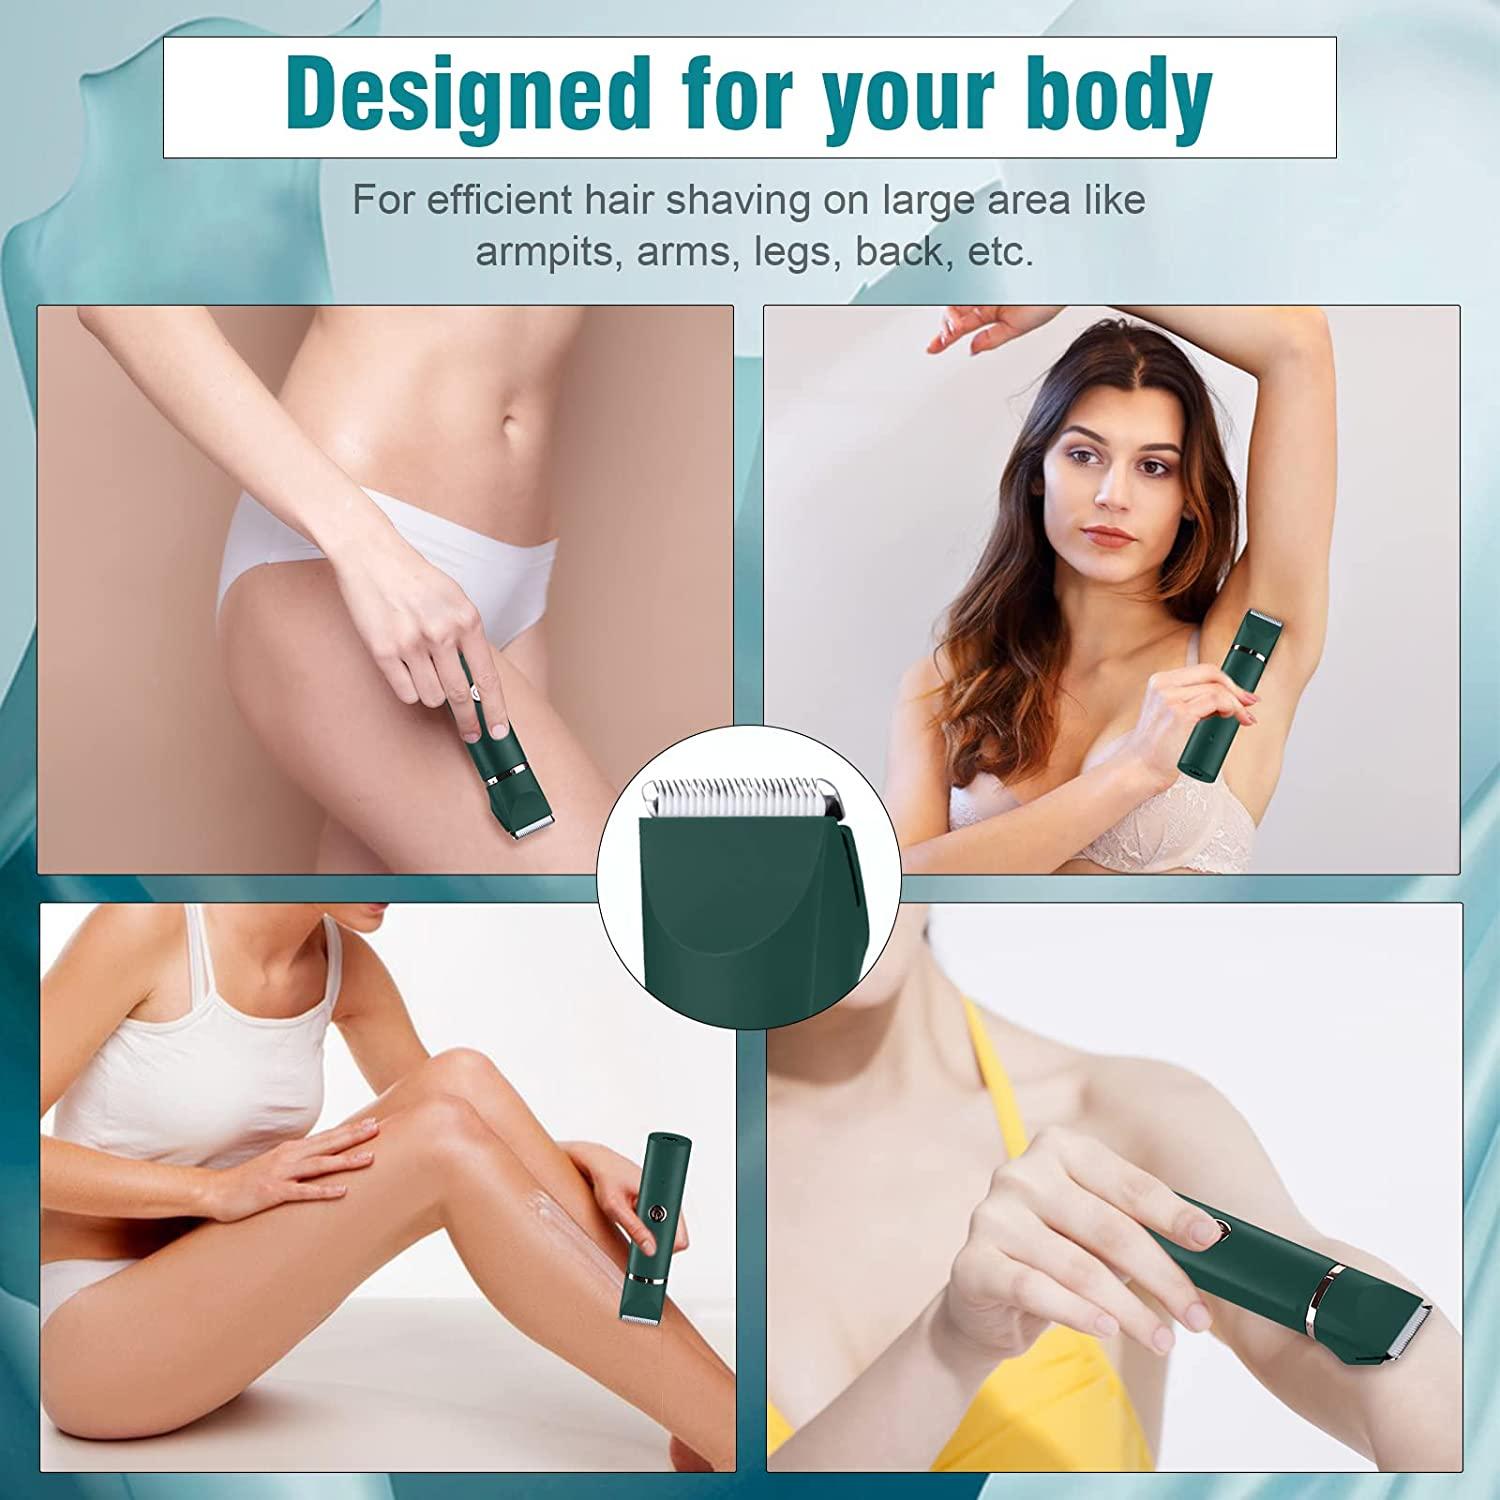 Bikini Trimmer for Women, YBLNTEK 2-in-1 Electric Razors for Women,  Electric Lady Clipper Pubic Hair Groomer, Hair Removal Razor Body Trimmer  for Women Arms,Legs and armpits, IPX7 Waterproof Wet/Dry Green